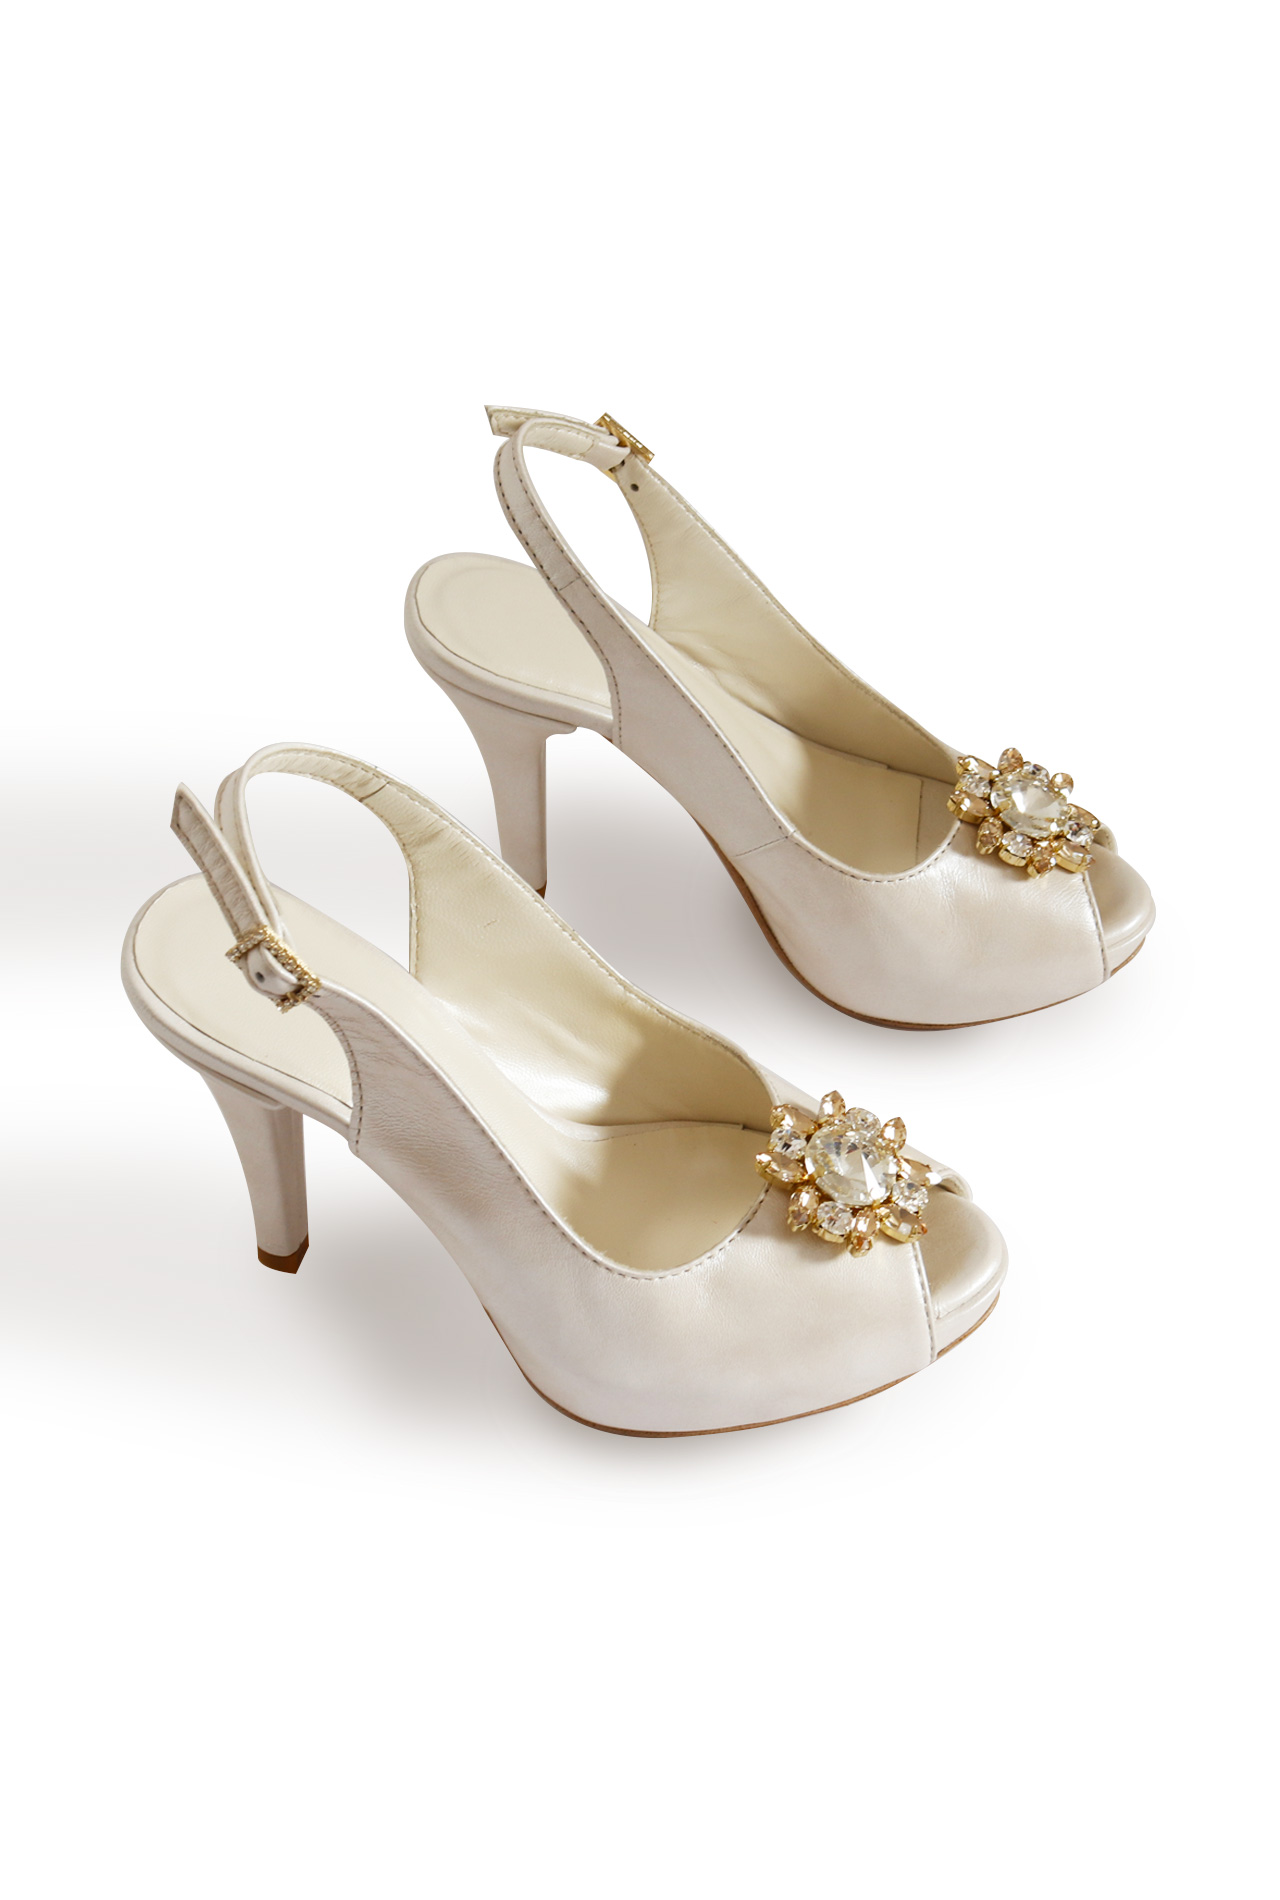 Wedding Pumps in Small Sizes 